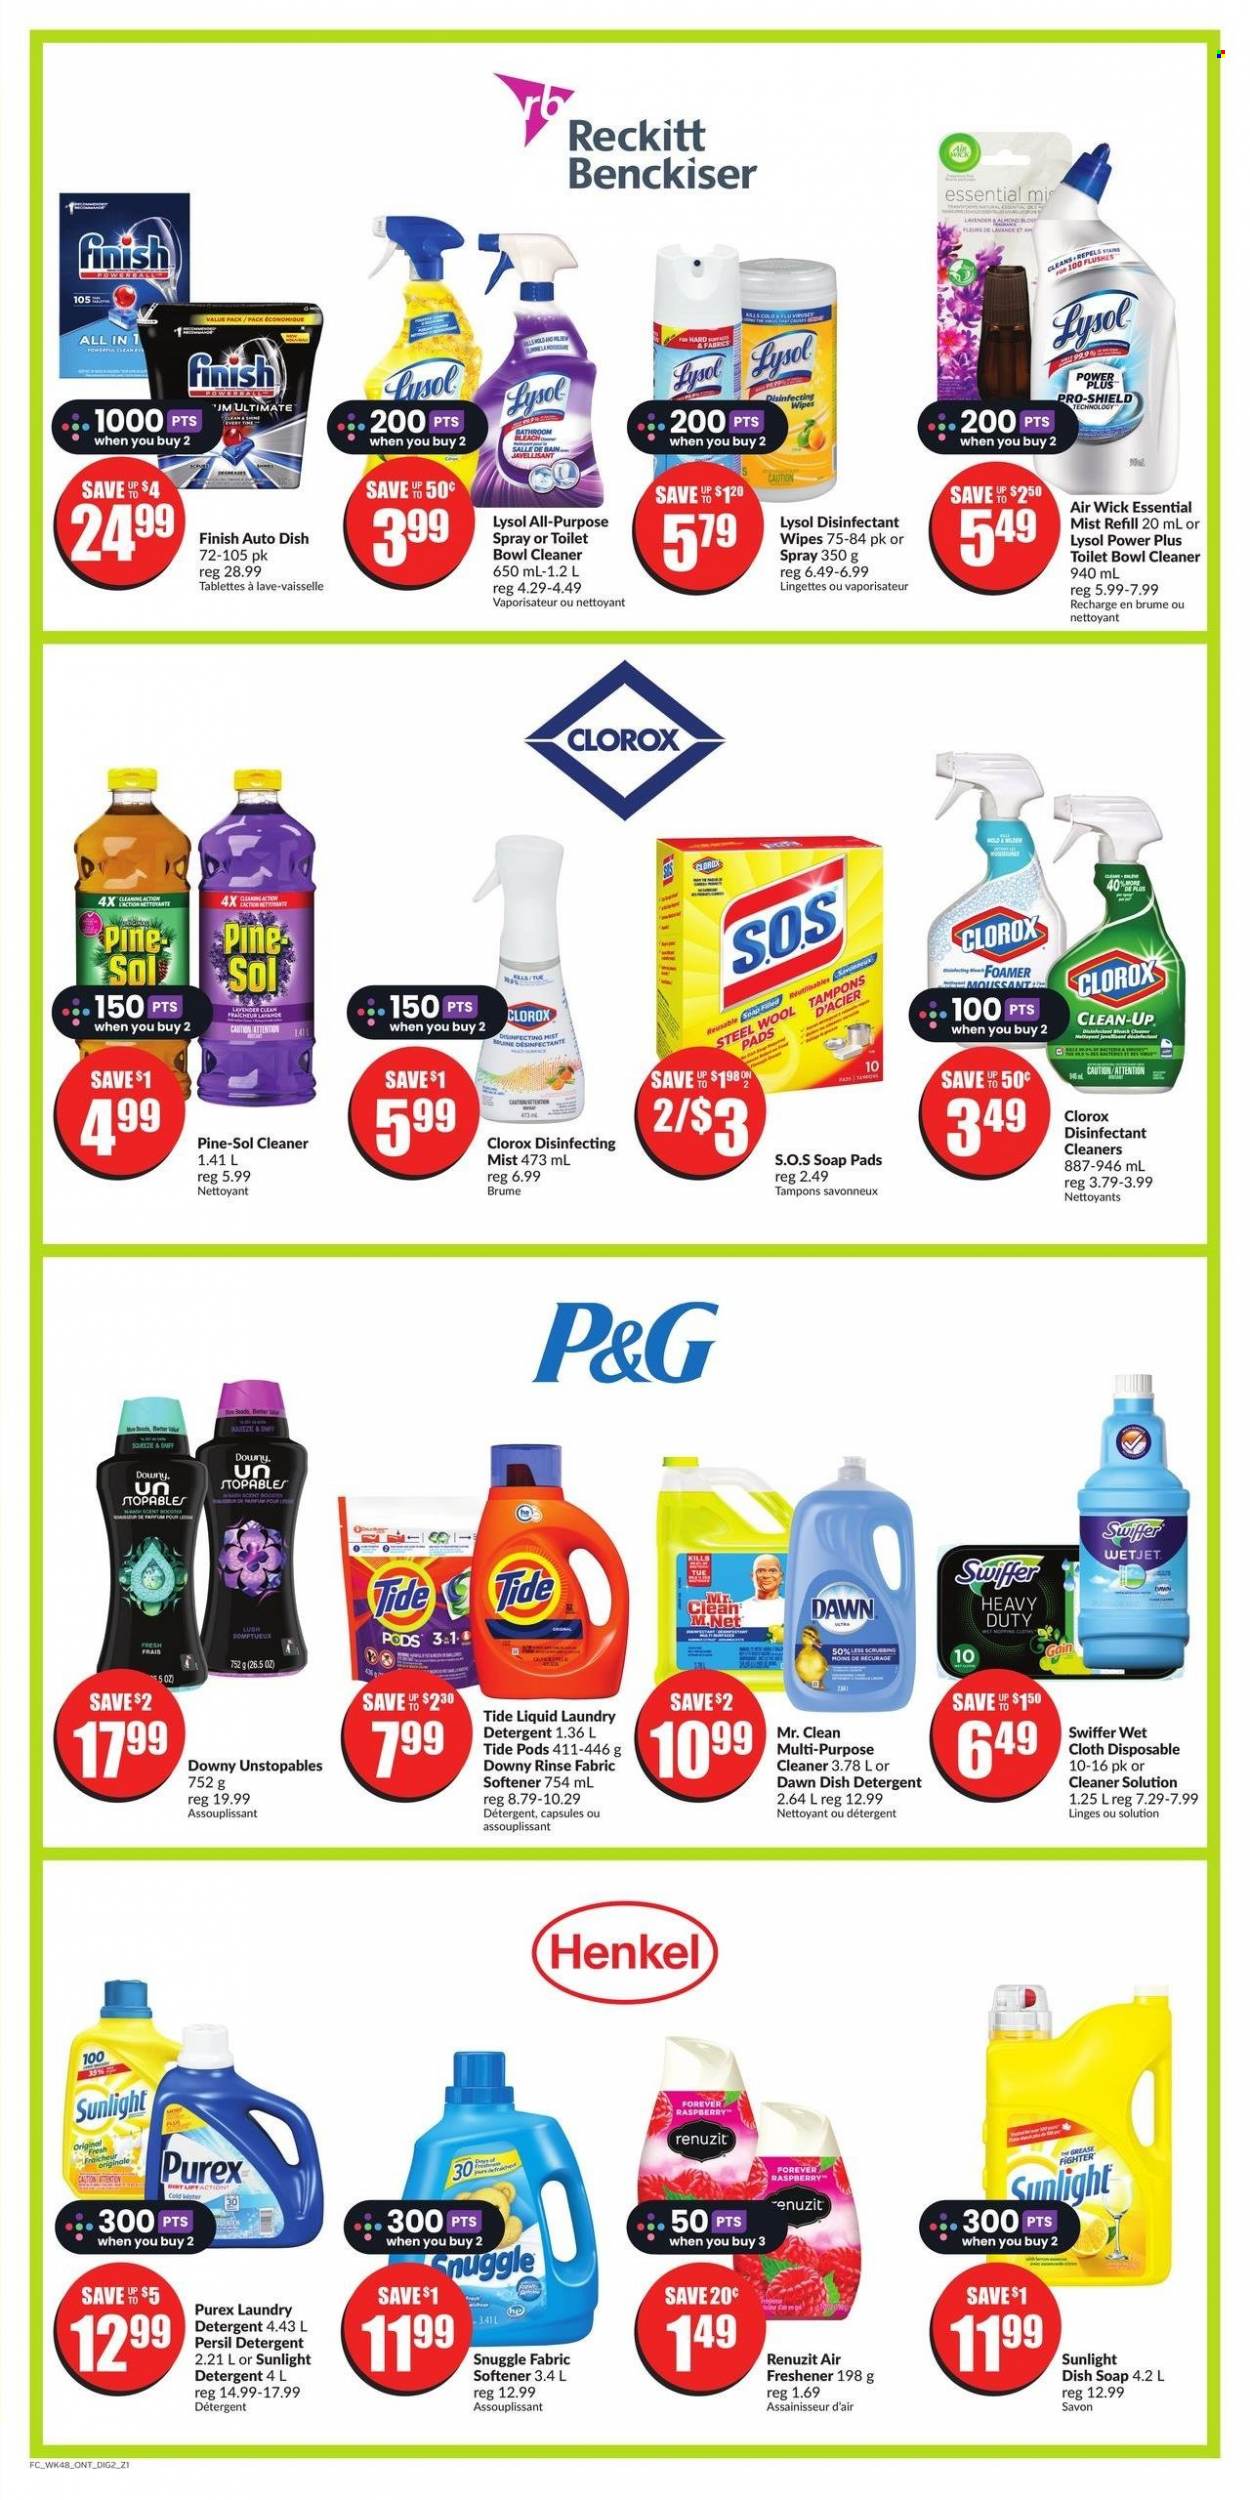 thumbnail - FreshCo. Flyer - March 30, 2023 - April 05, 2023 - Sales products - L'Or, wipes, cleaner, bleach, Lysol, Clorox, Pine-Sol, Swiffer, Snuggle, Tide, Unstopables, Persil, fabric softener, laundry detergent, Sunlight, Purex, dishwasher cleaner, soap, tampons, WetJet, Renuzit, air freshener, Air Wick, detergent, desinfection. Page 6.